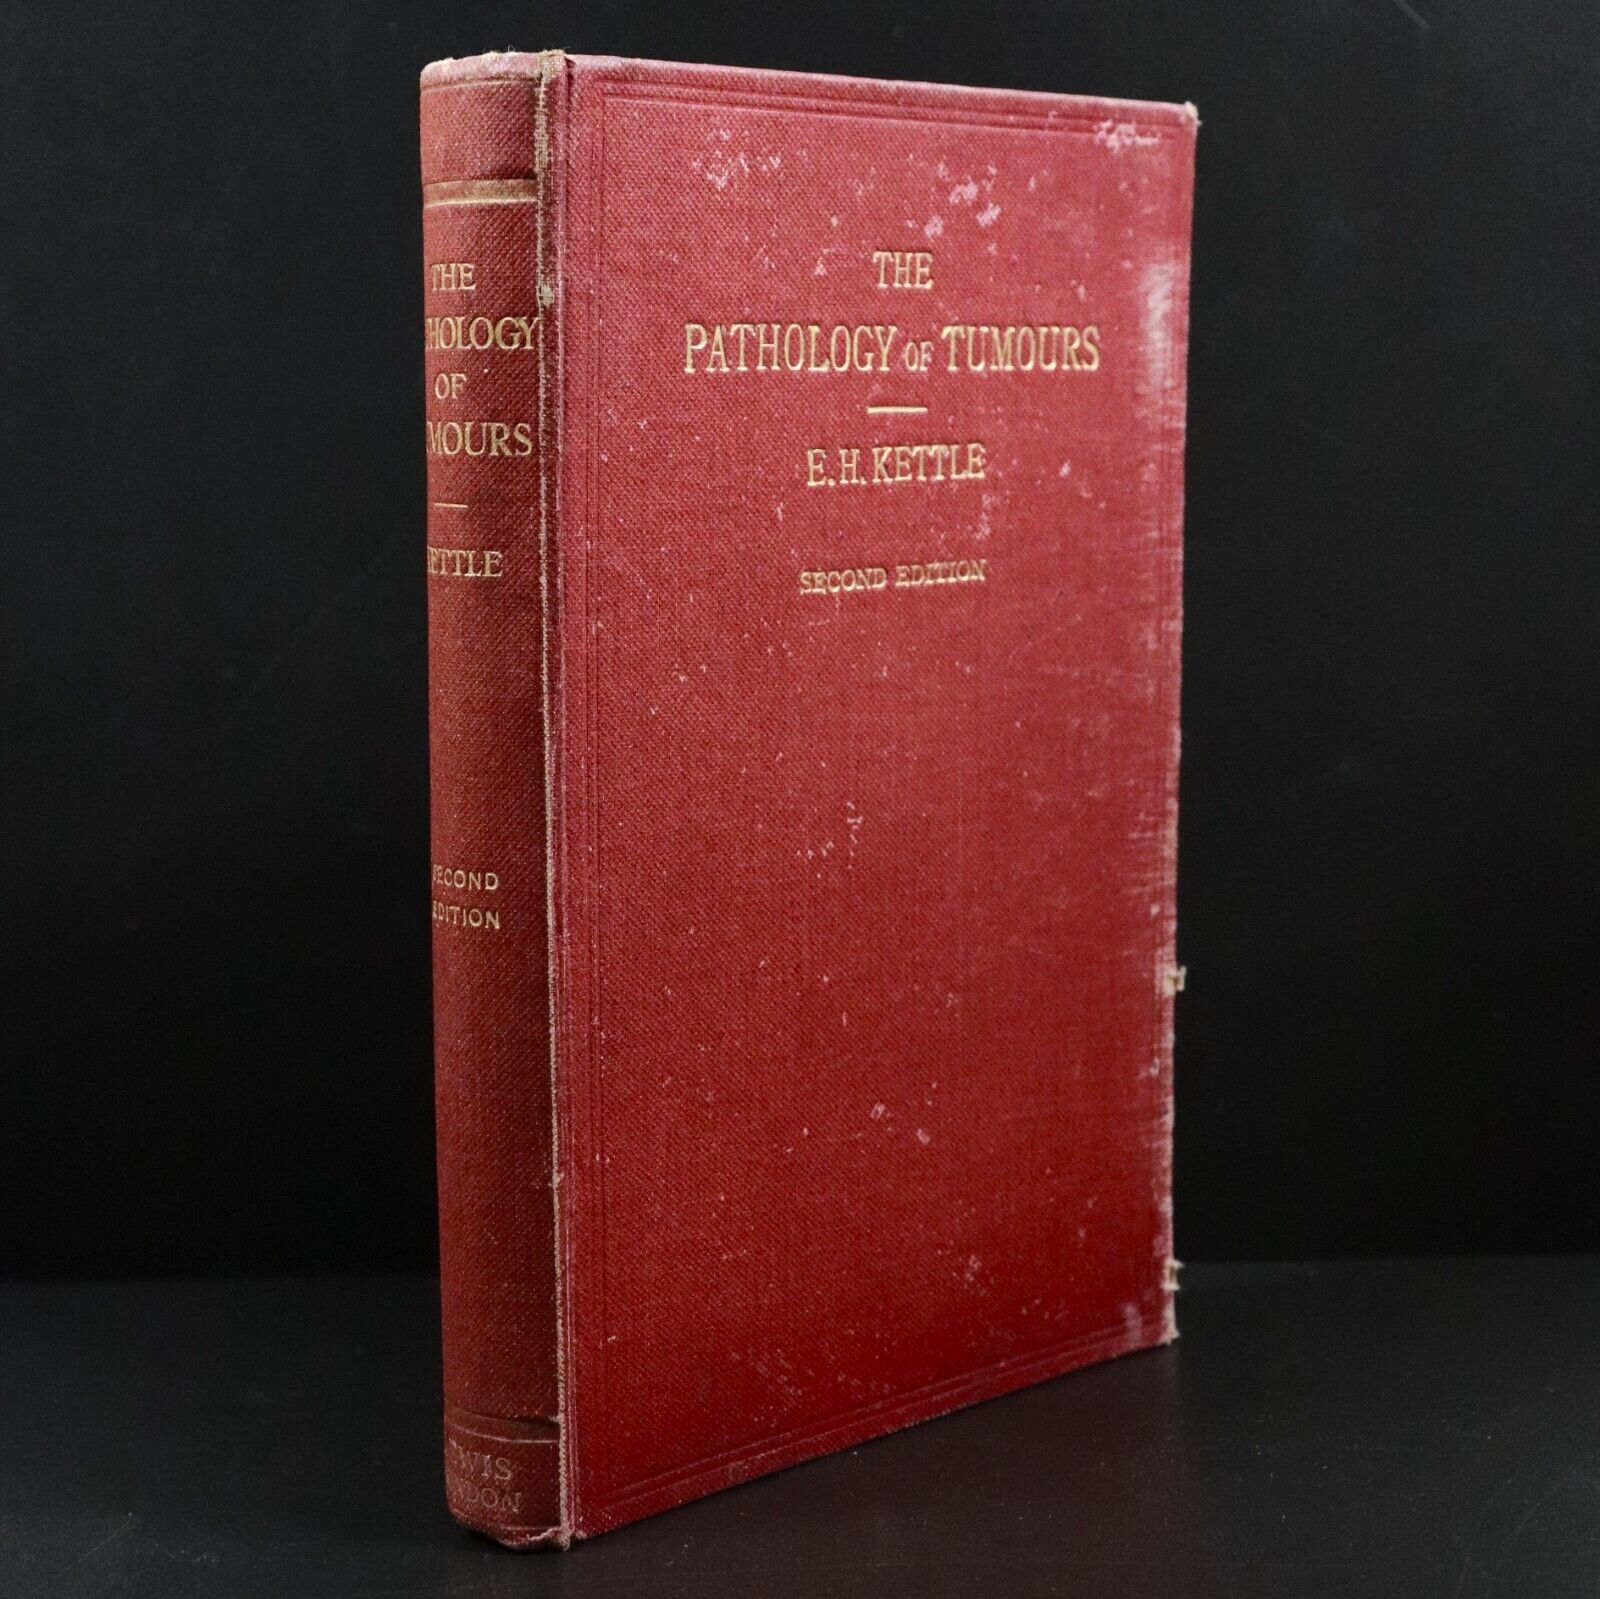 1925 The Pathology Of Tumours by E.H. Kettle Antique Medical Research Book